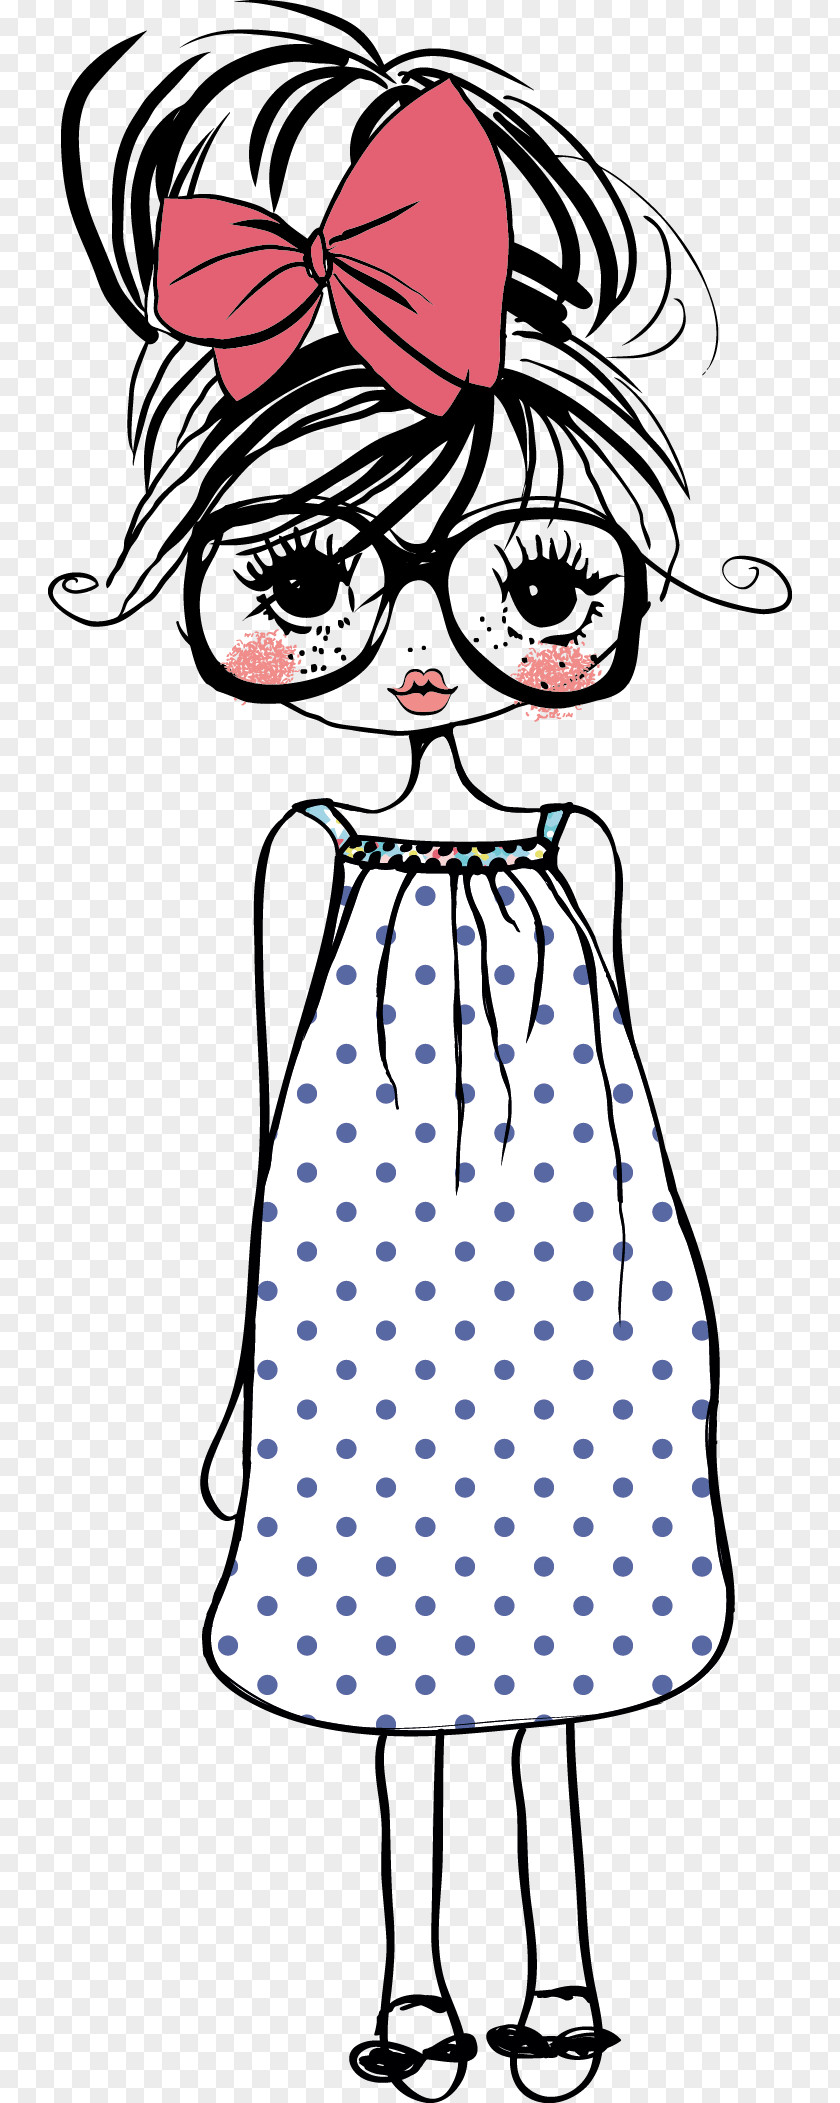 Girl Cartoon Drawing Illustration PNG Illustration, Cute cartoon girl, girl wearing white and blue polka-dot dress with pink bow illustration clipart PNG